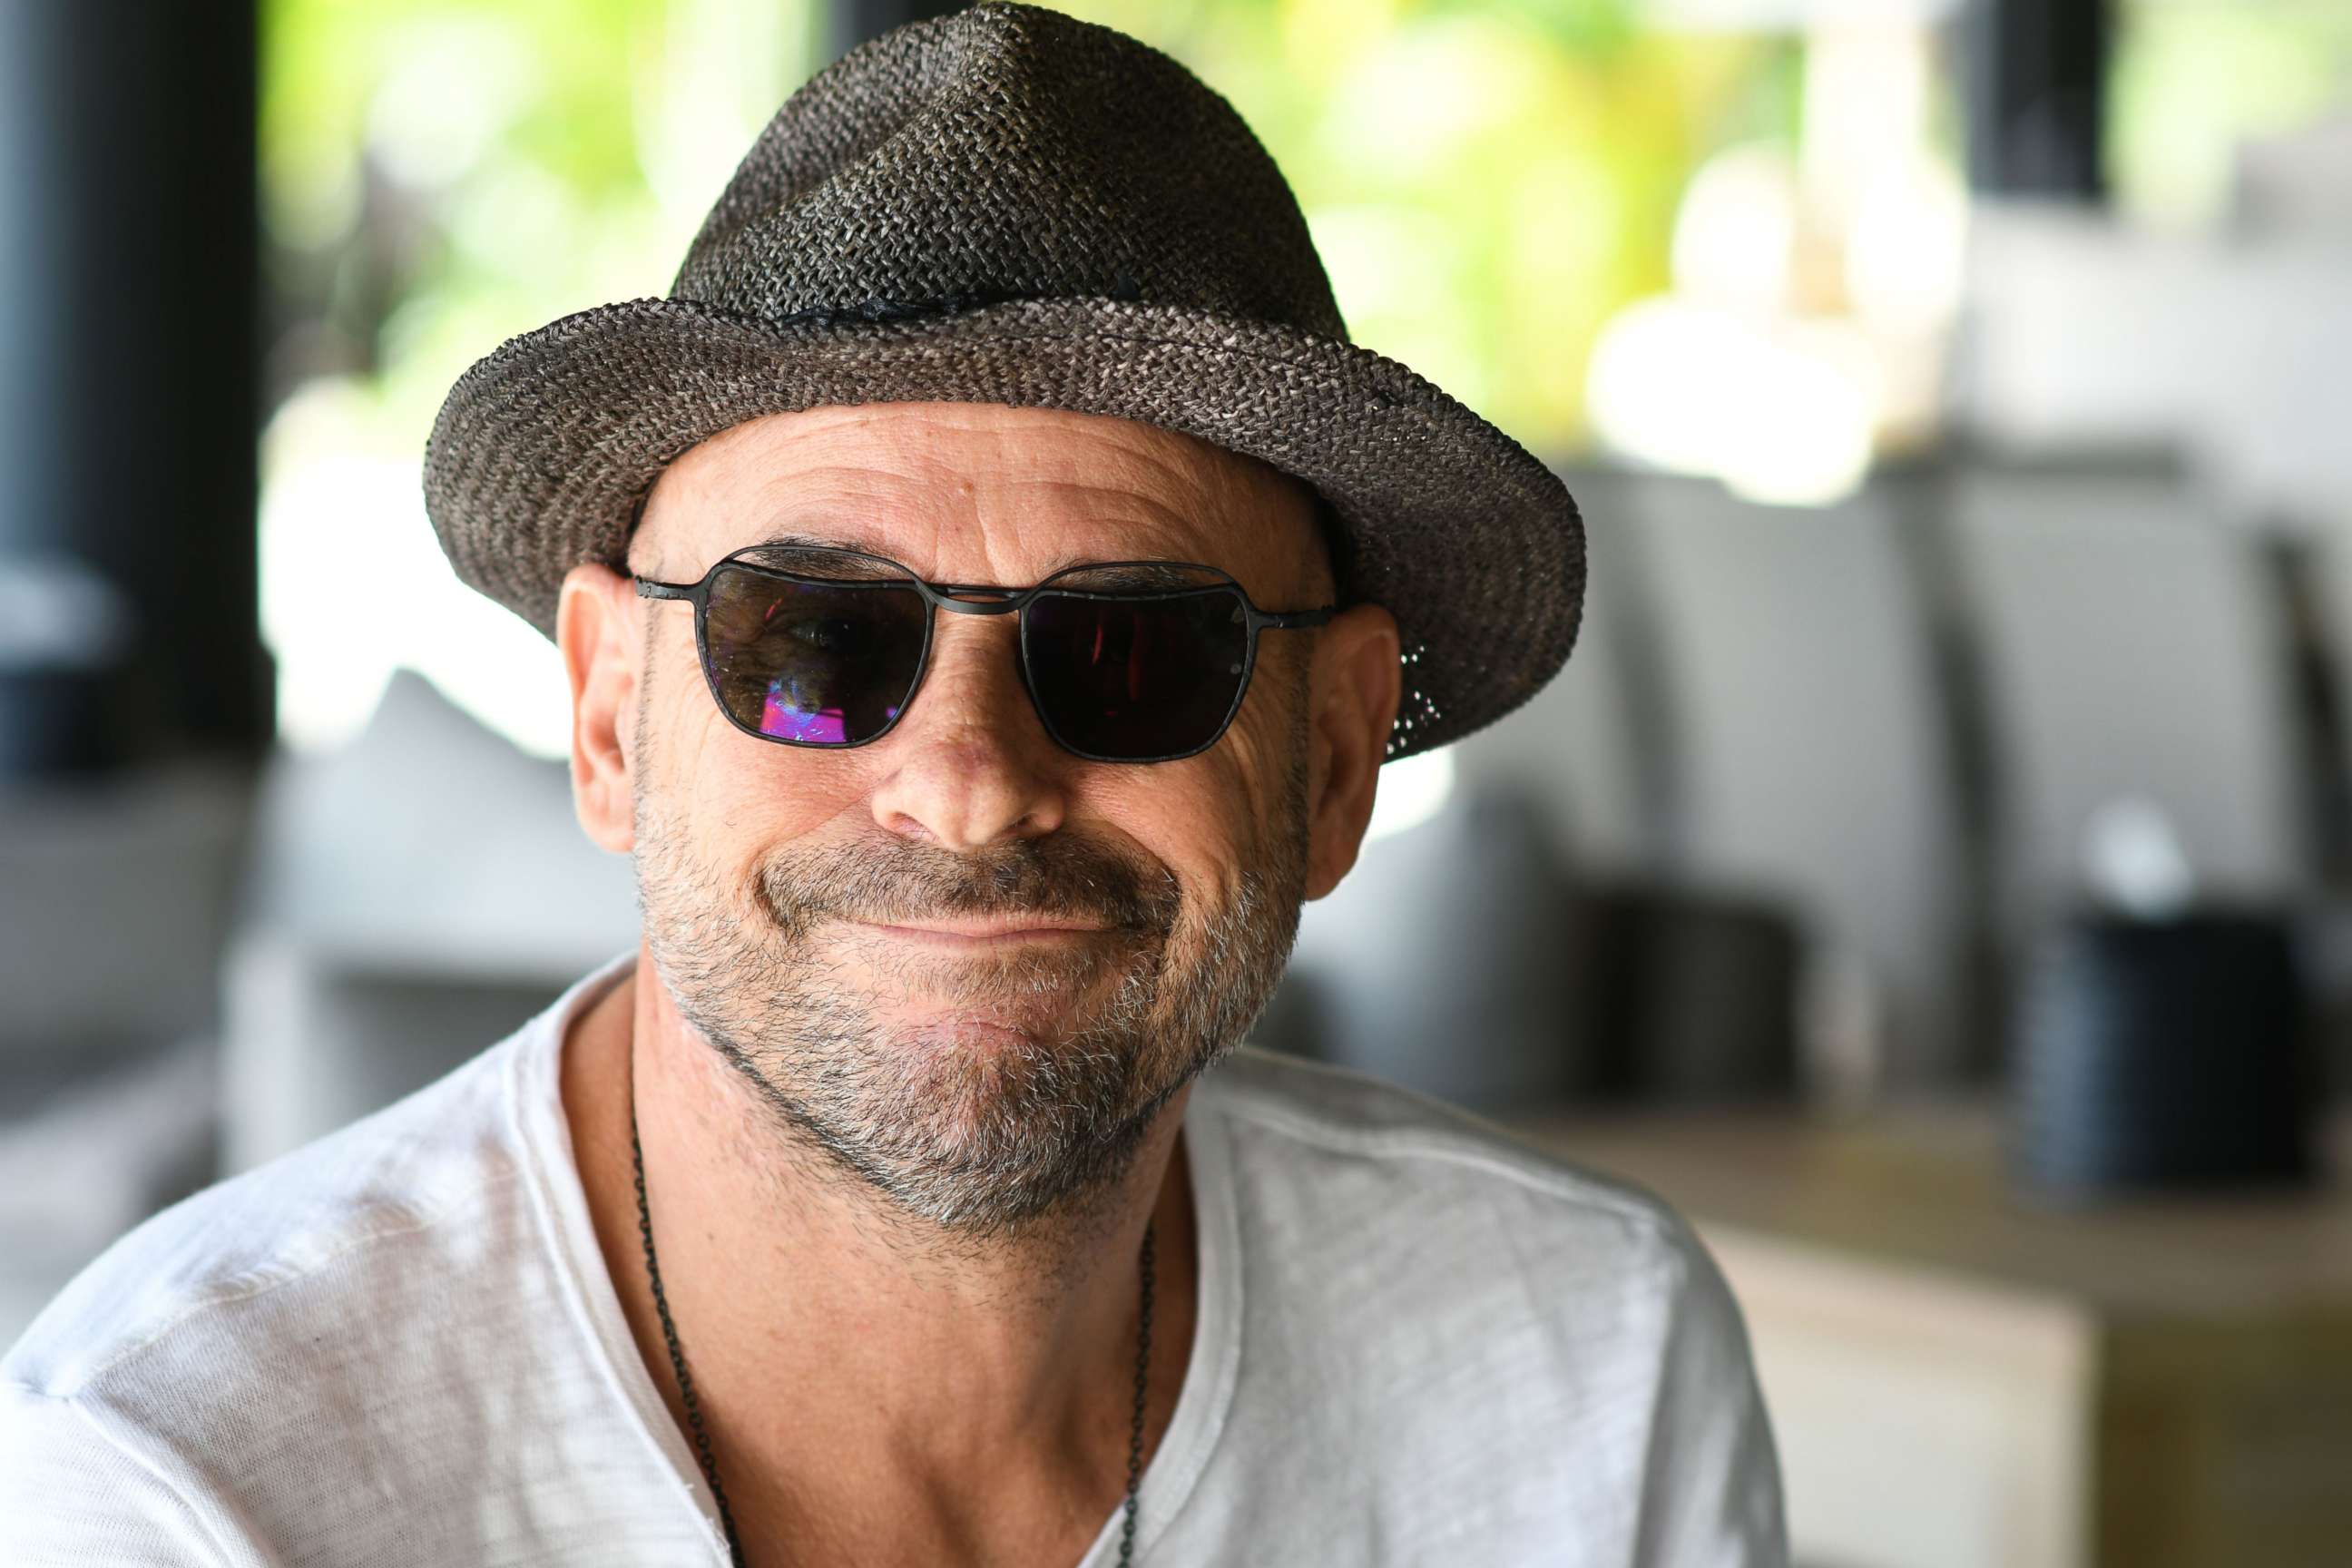 PHOTO: In this file photo taken on July 19, 2019, Guy Laliberte, co-founder of global circus company Cirque du Soleil, poses for a photo on his private island of Nuketepipi in French Polynesia.